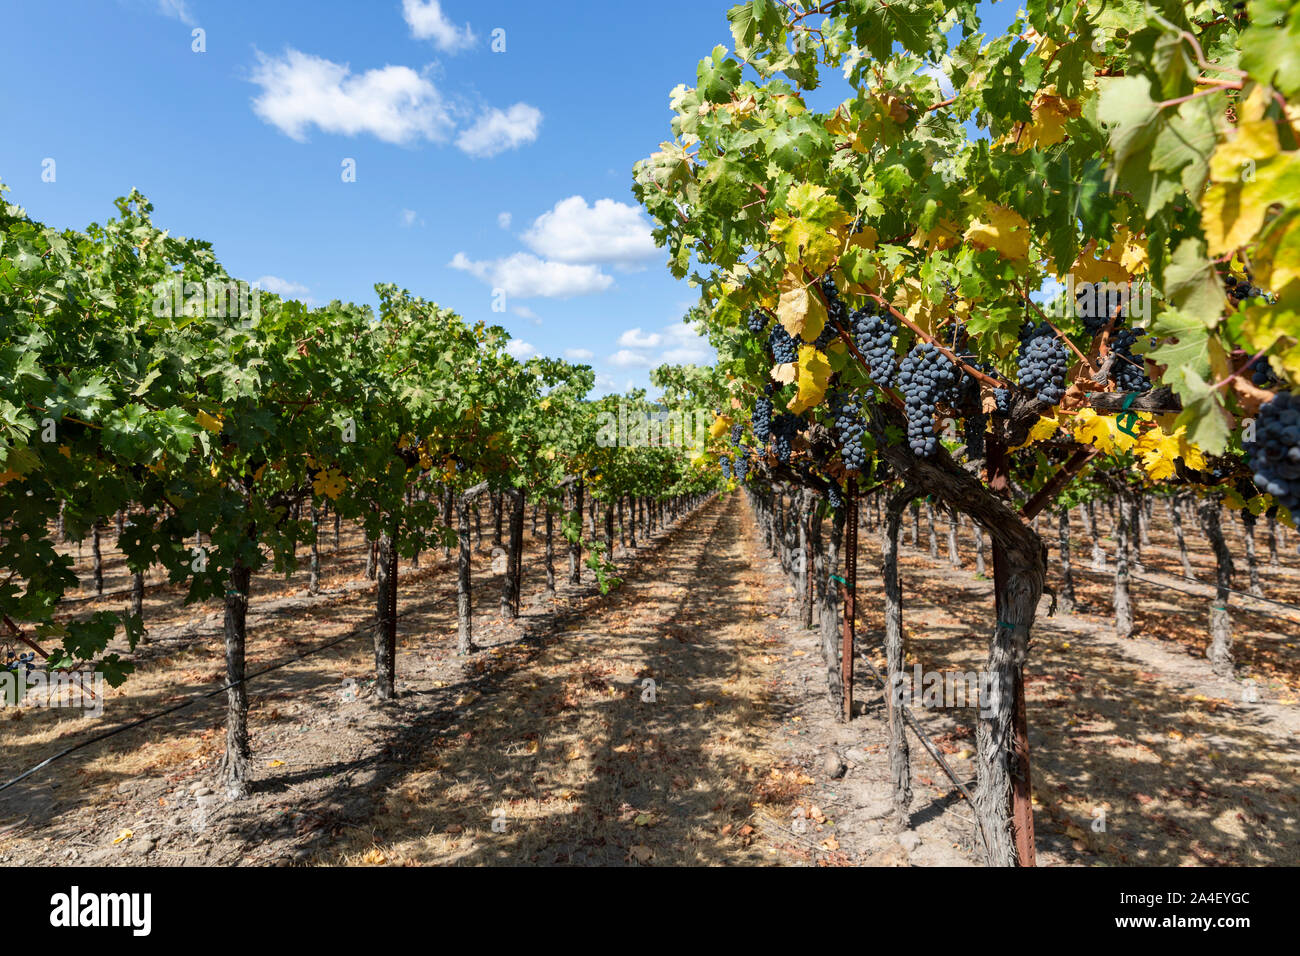 Rows of Merlot grapes growing on the vine in a Califonian Vineyard. Stock Photo